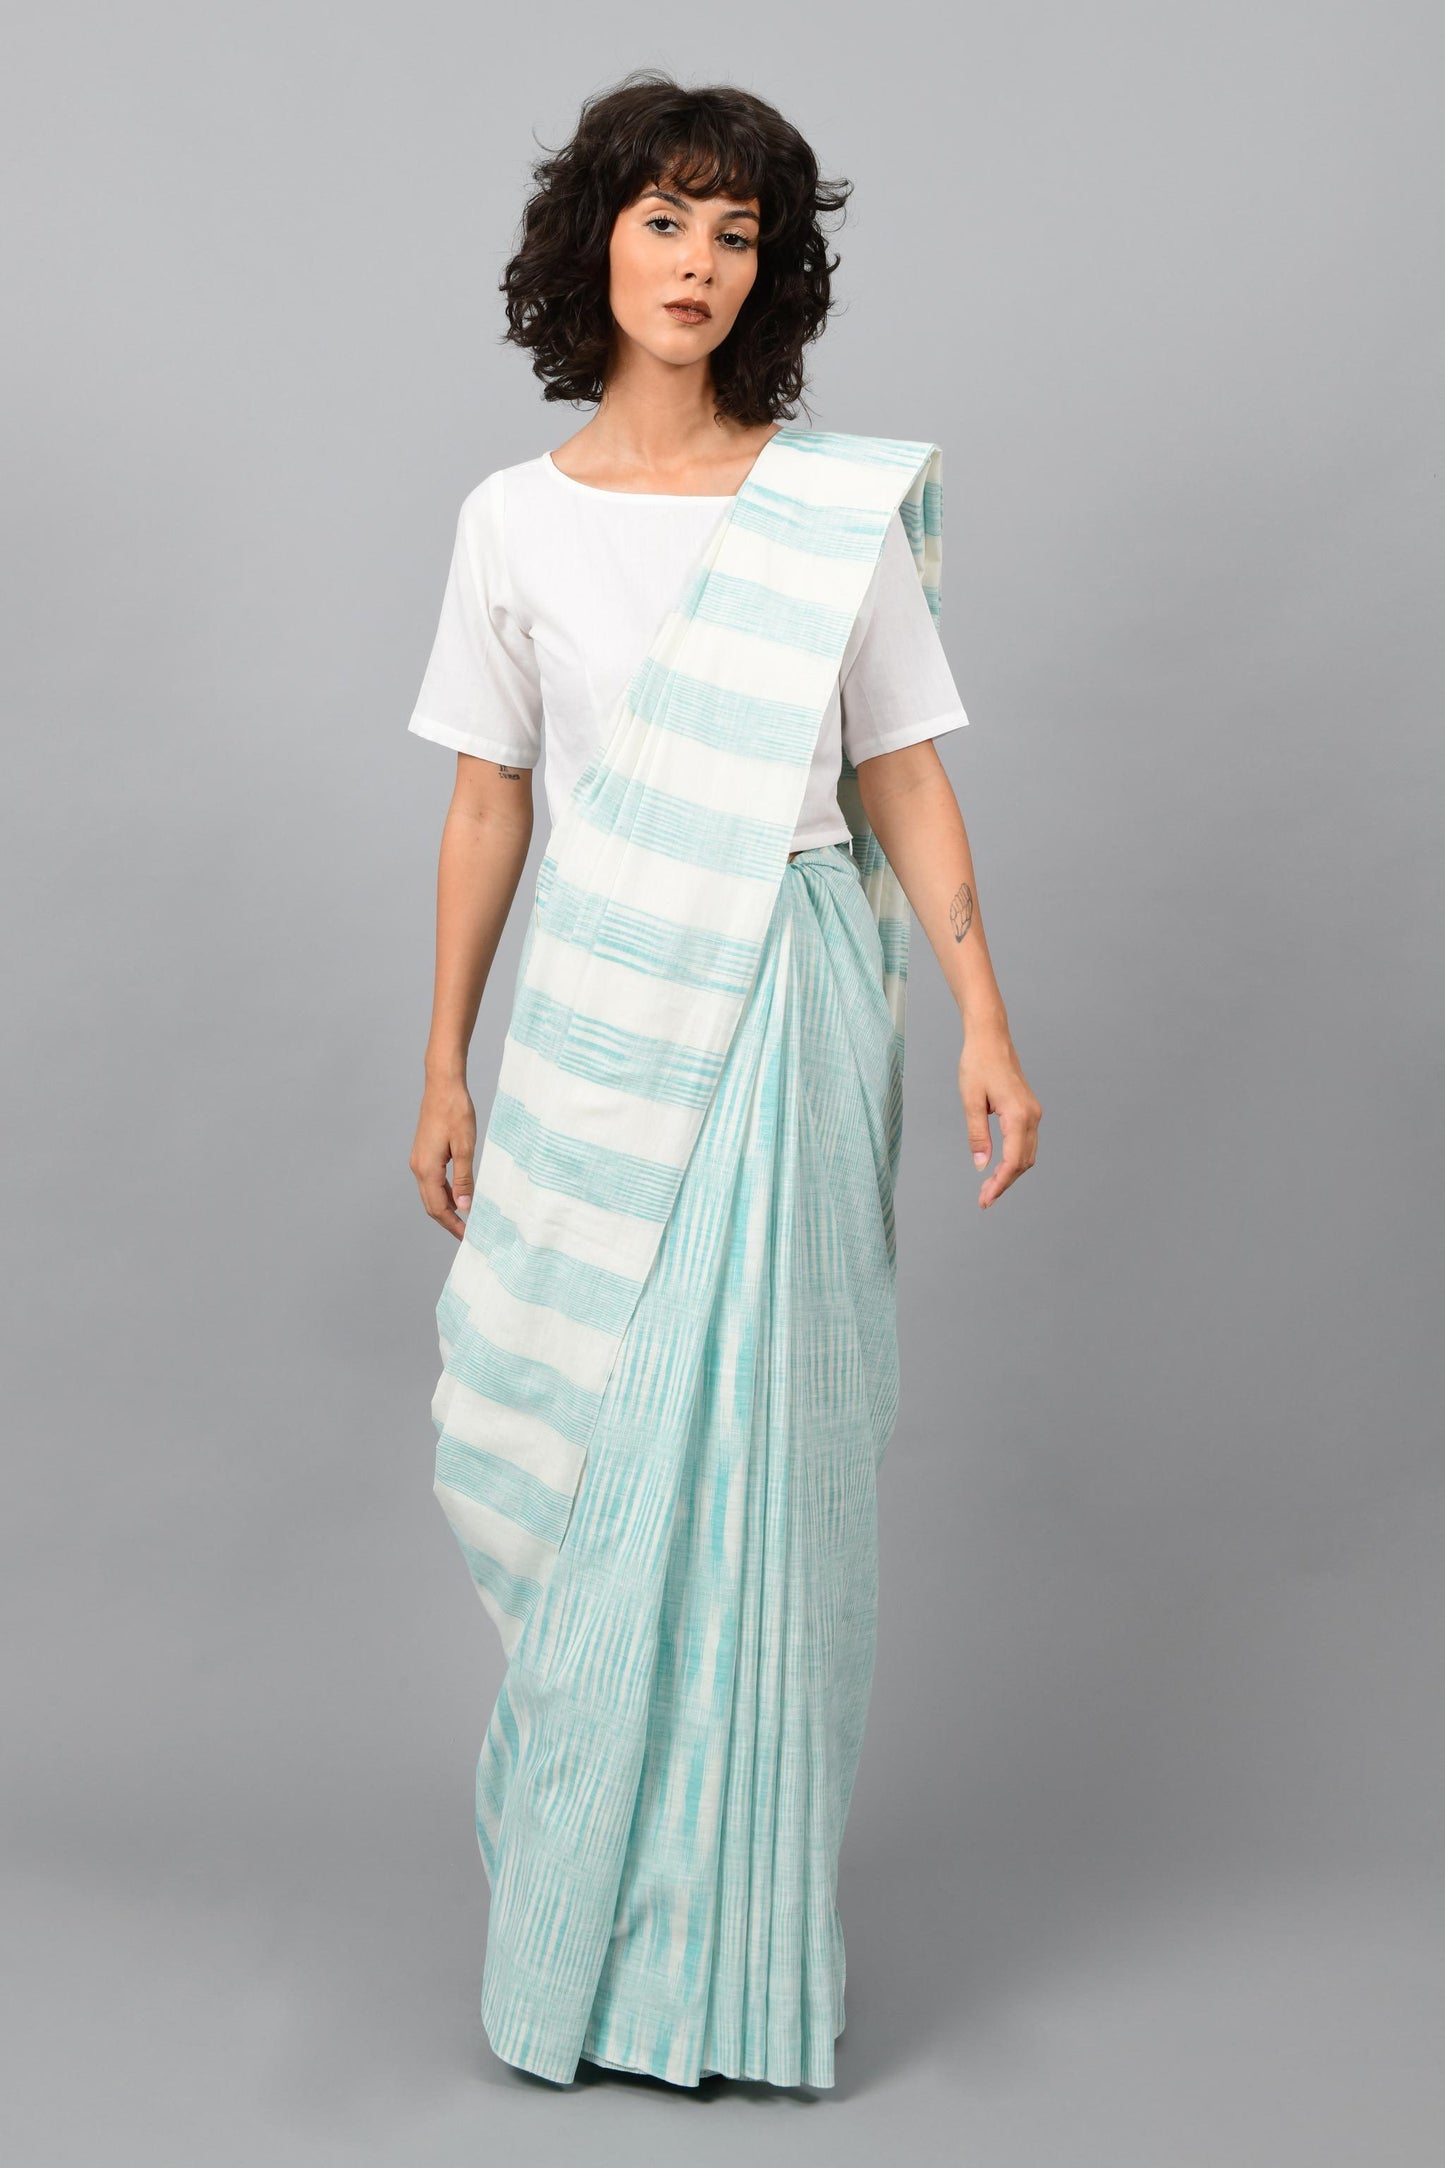 Front pose of a female womenswear fashion model draped in a aquamarine blue & white space dyed homespun and handwoven cotton sari by Cotton Rack.